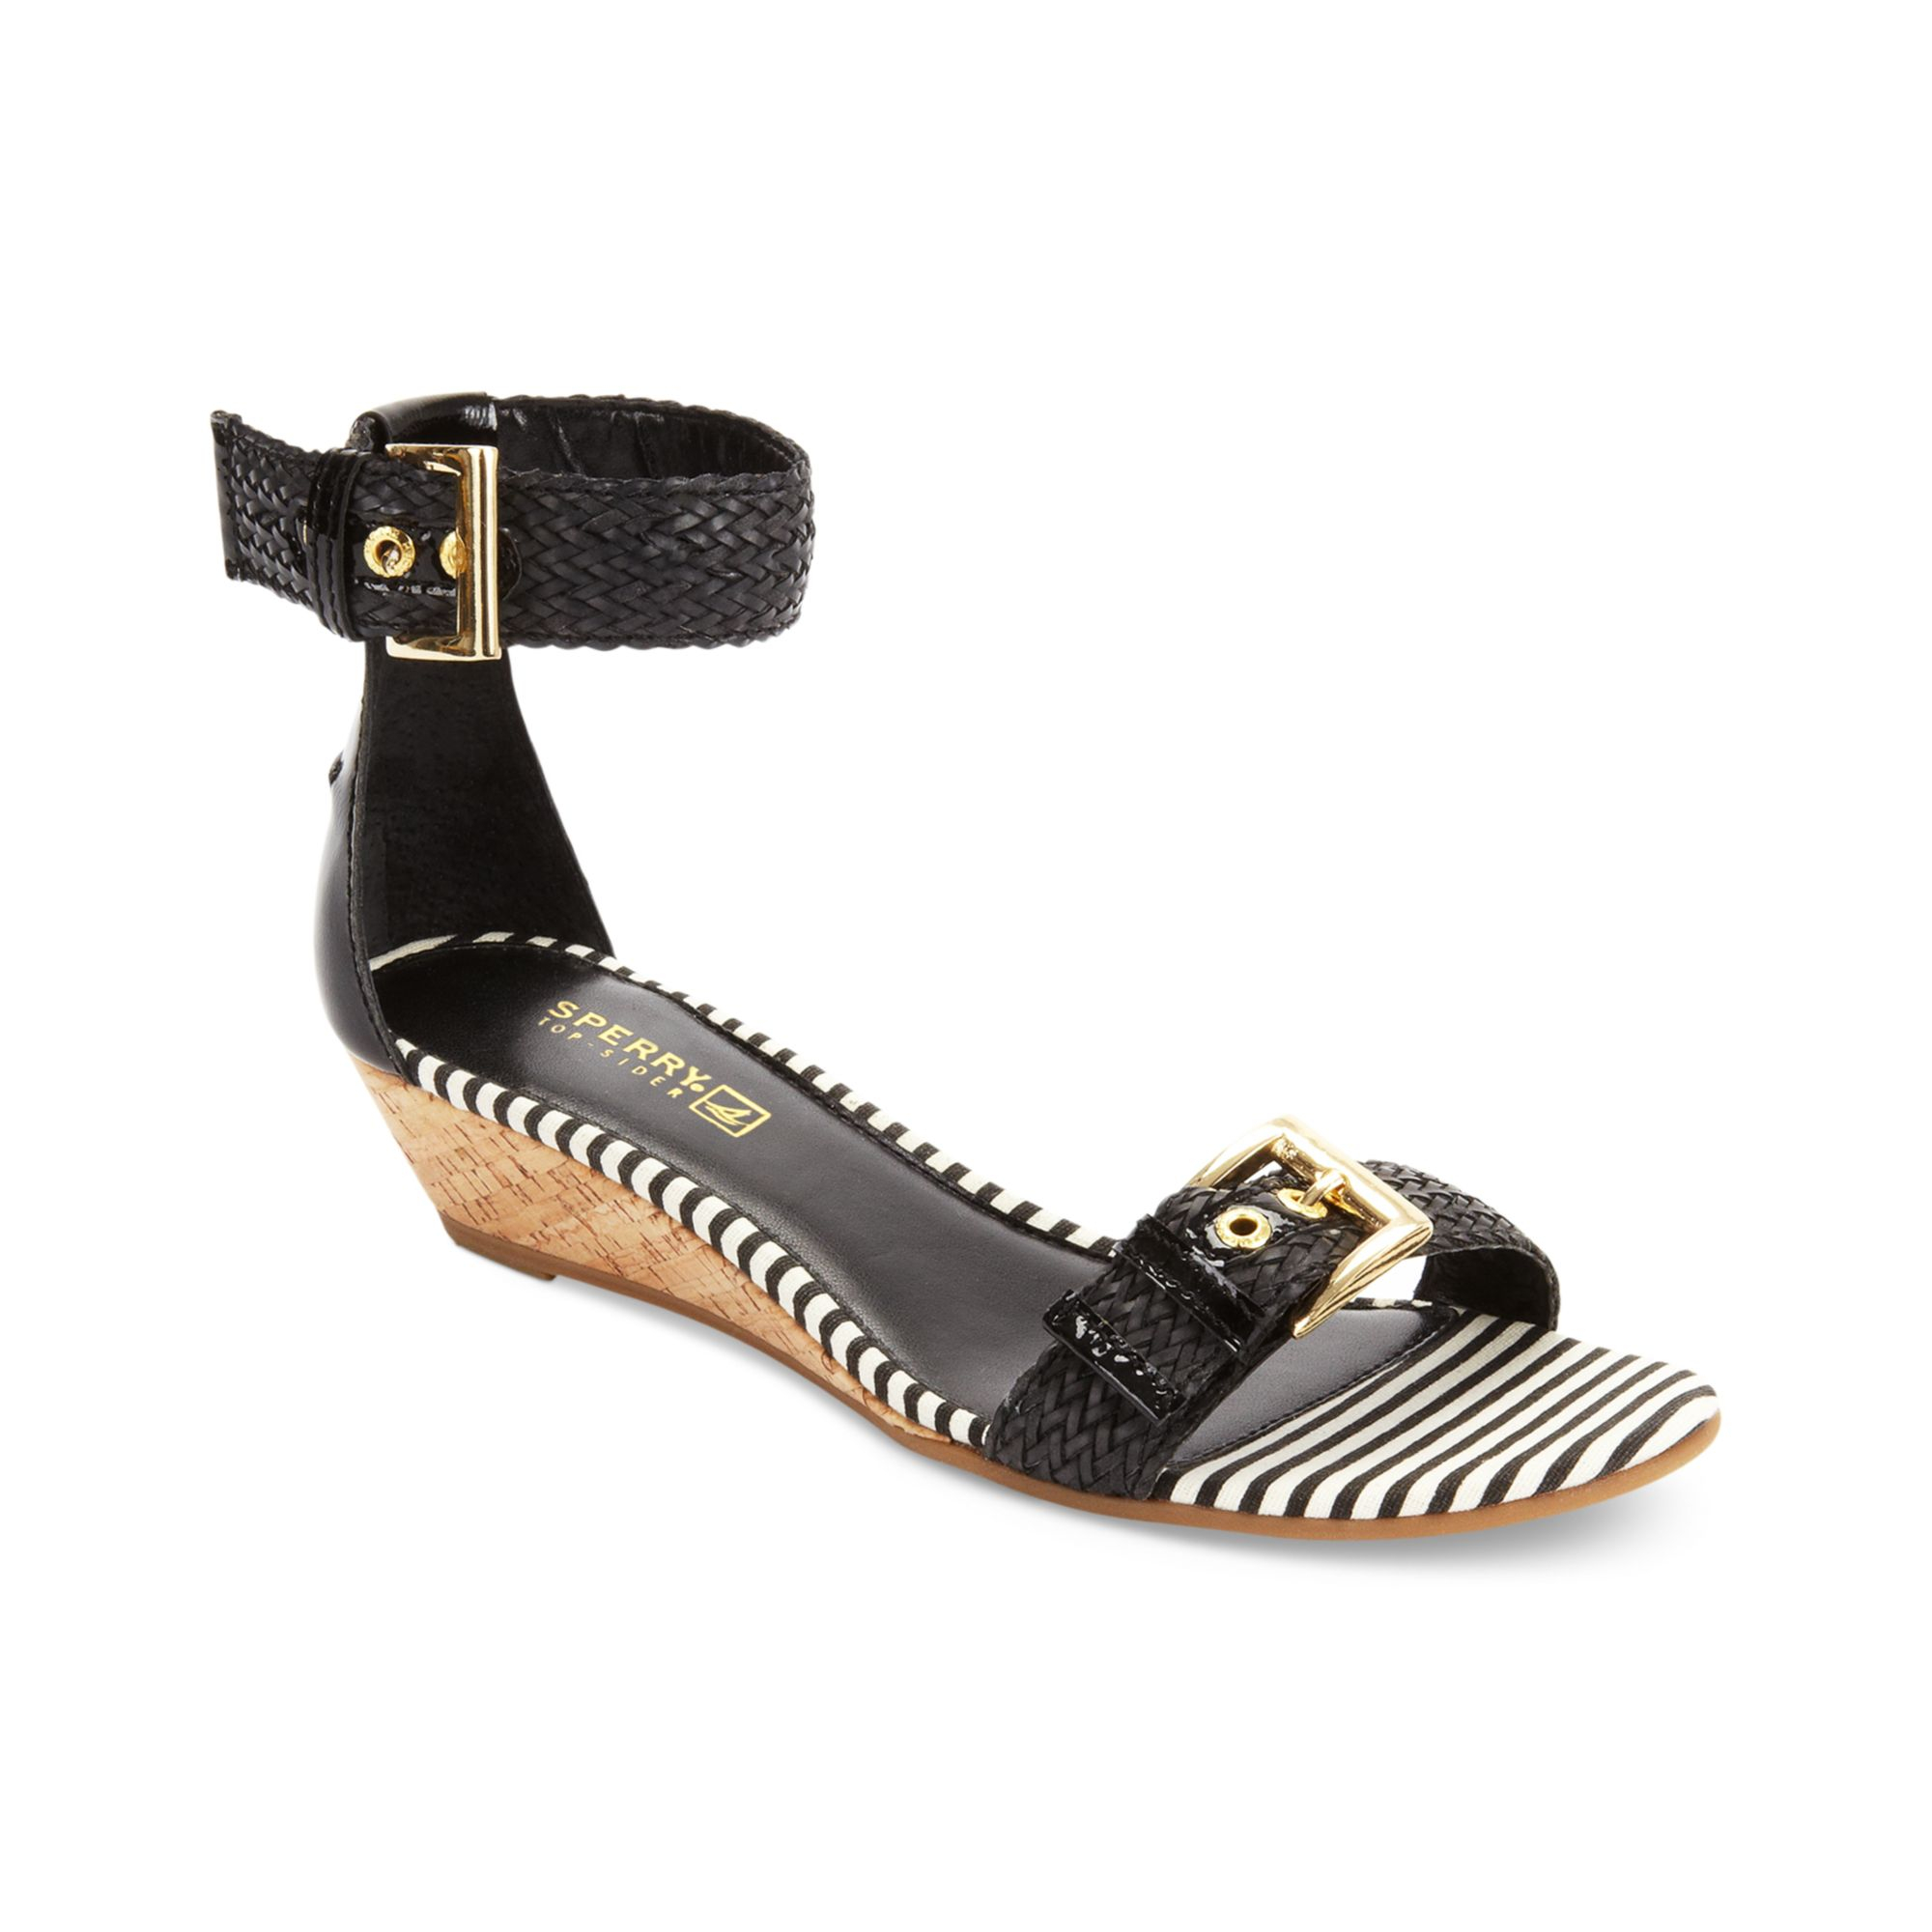 Sperry Top-sider Lynnbrook Wedge Sandals in Black (black woven) | Lyst